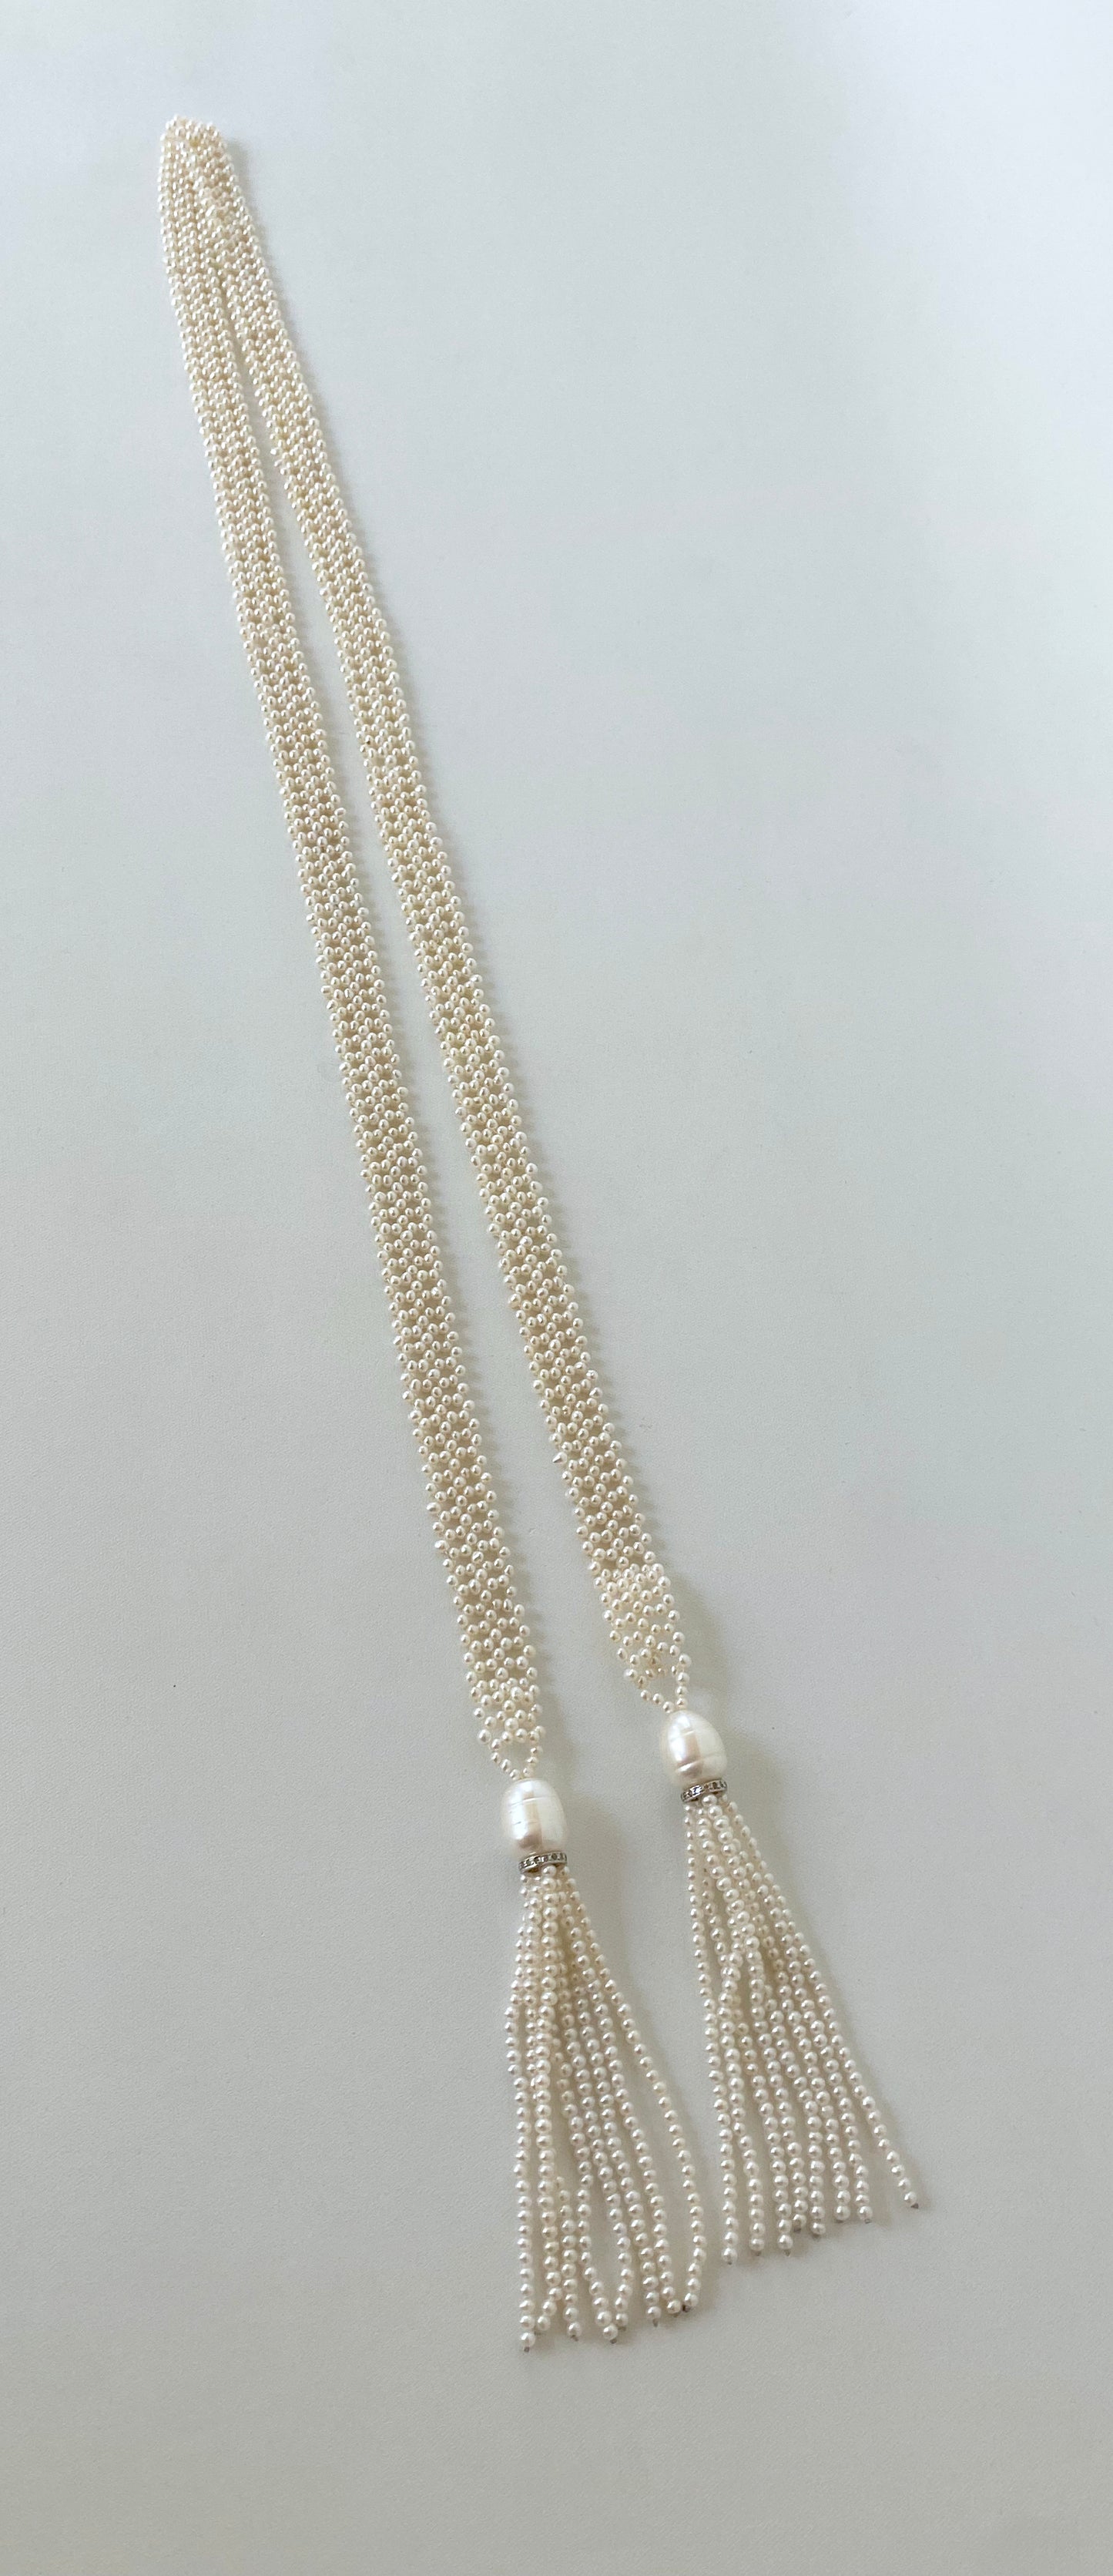 Lace Woven Open Pearl Sautoir with Diamond Encrusted Silver Tassels